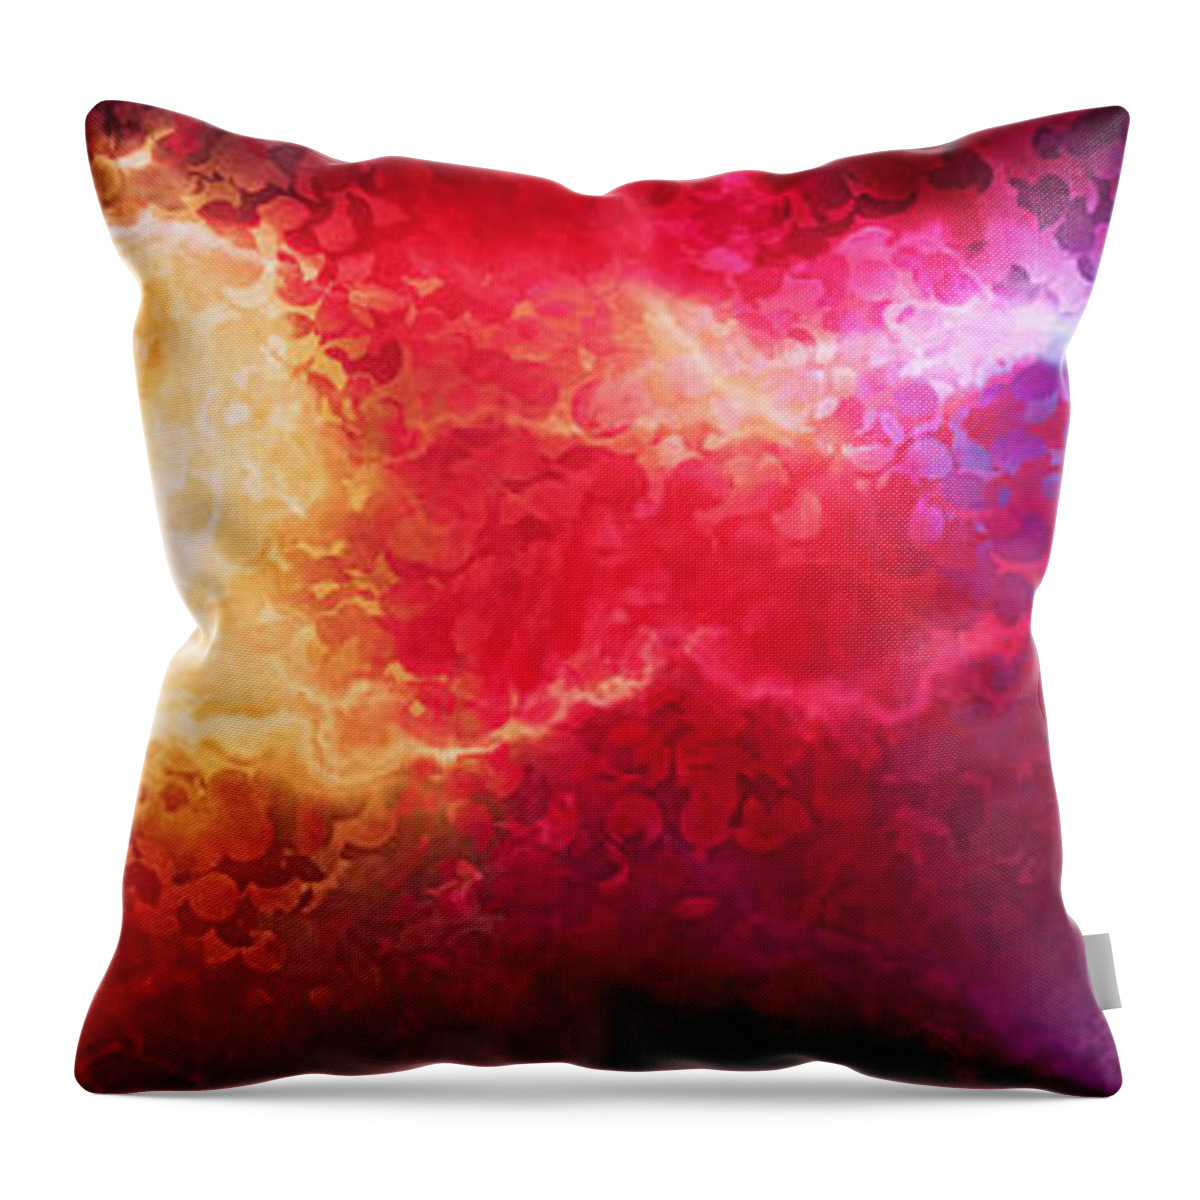 Abstract Art Throw Pillow featuring the painting Creation - Abstract Art by Jaison Cianelli